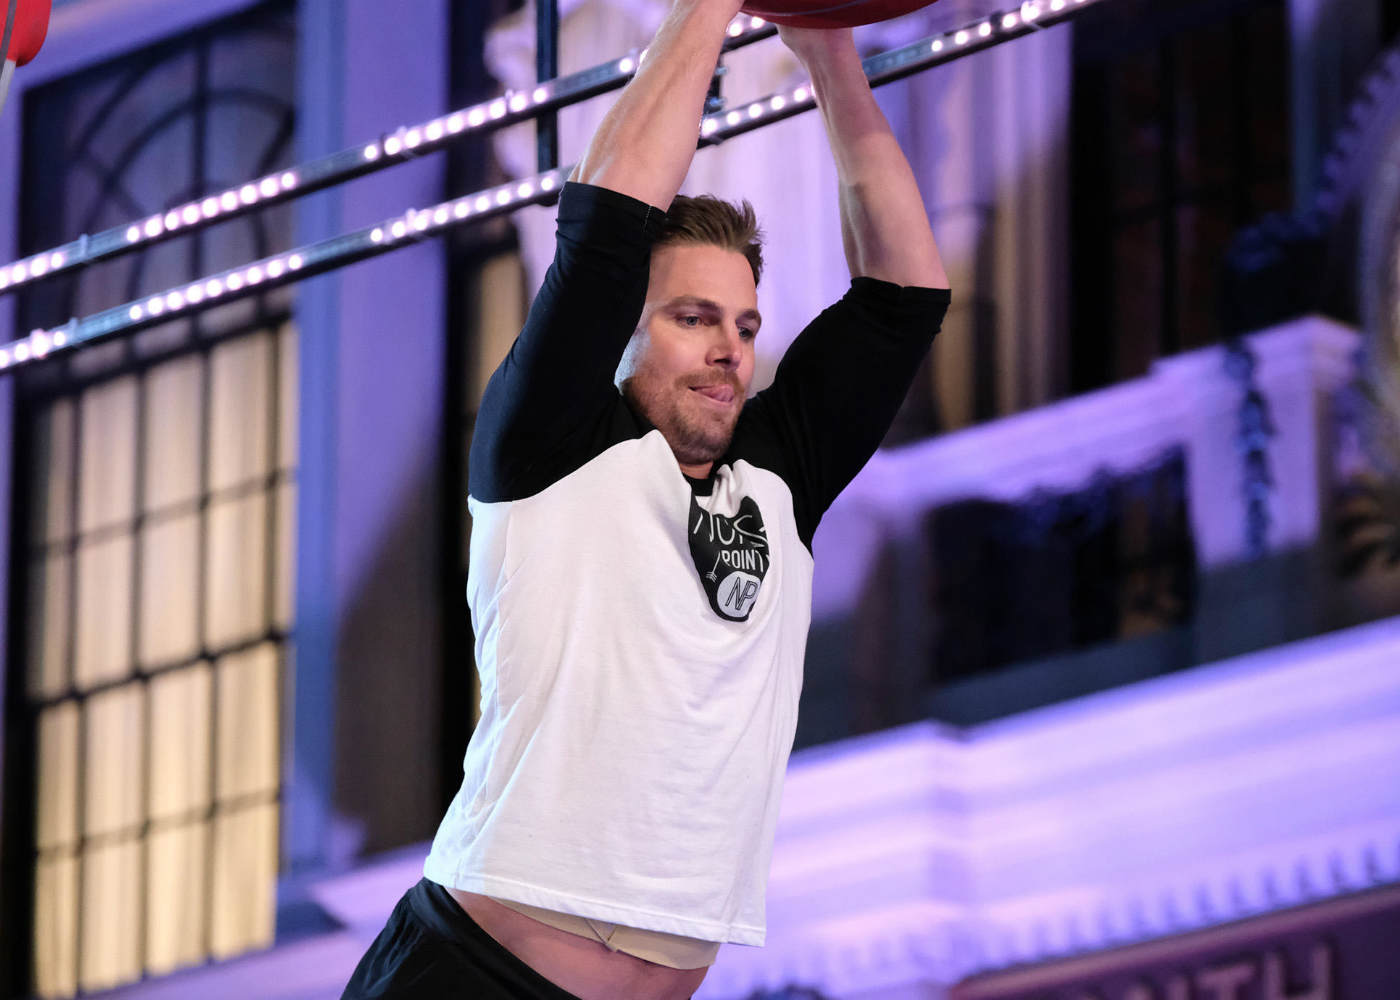 Arrow’s Stephen Amell Crushed the Ninja Warrior Course for Charity